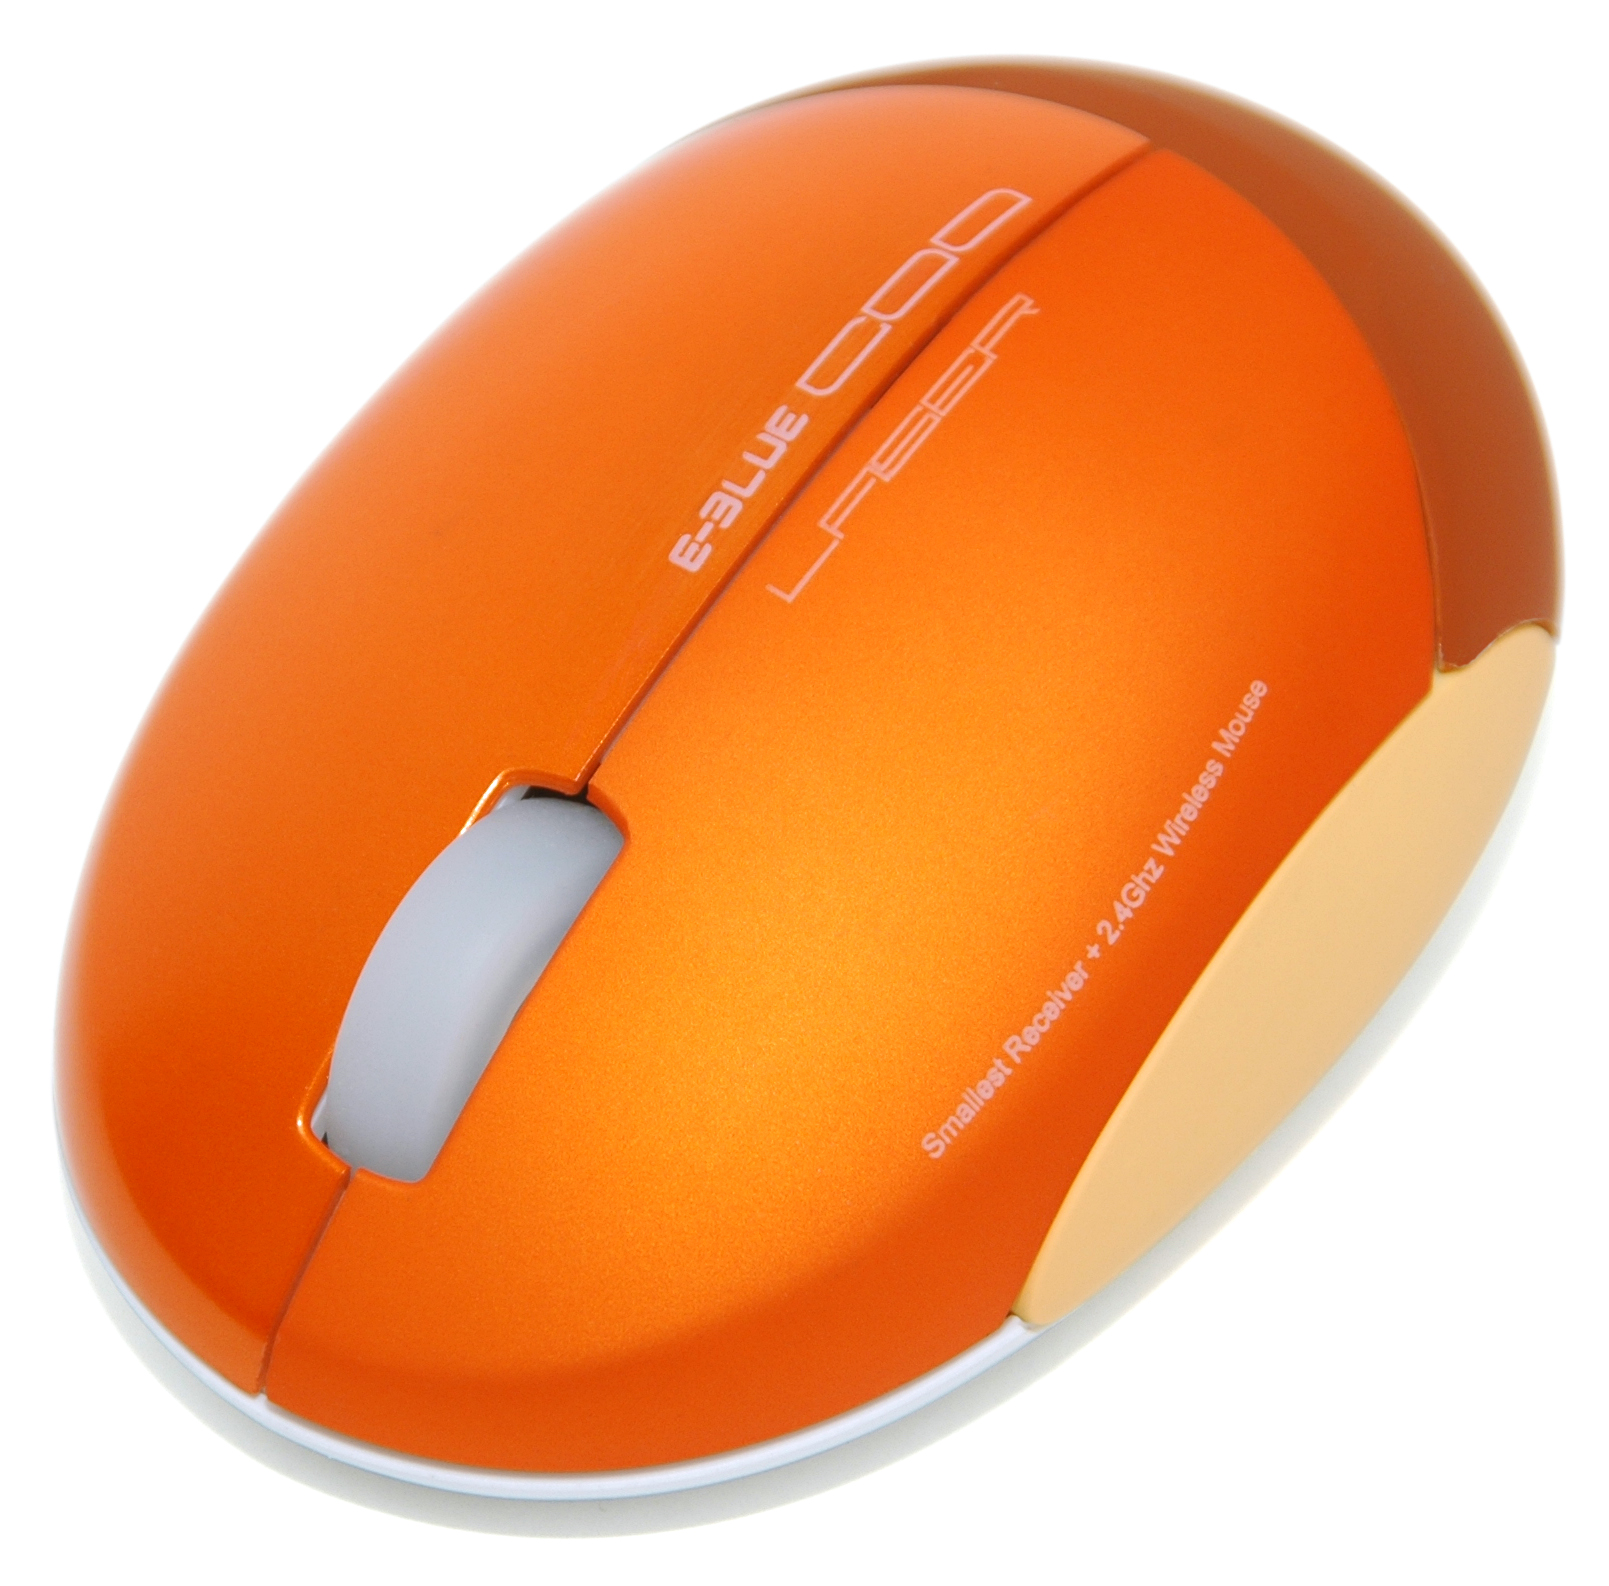 Coo  2.4G Wireless G-Laser Optical Mouse